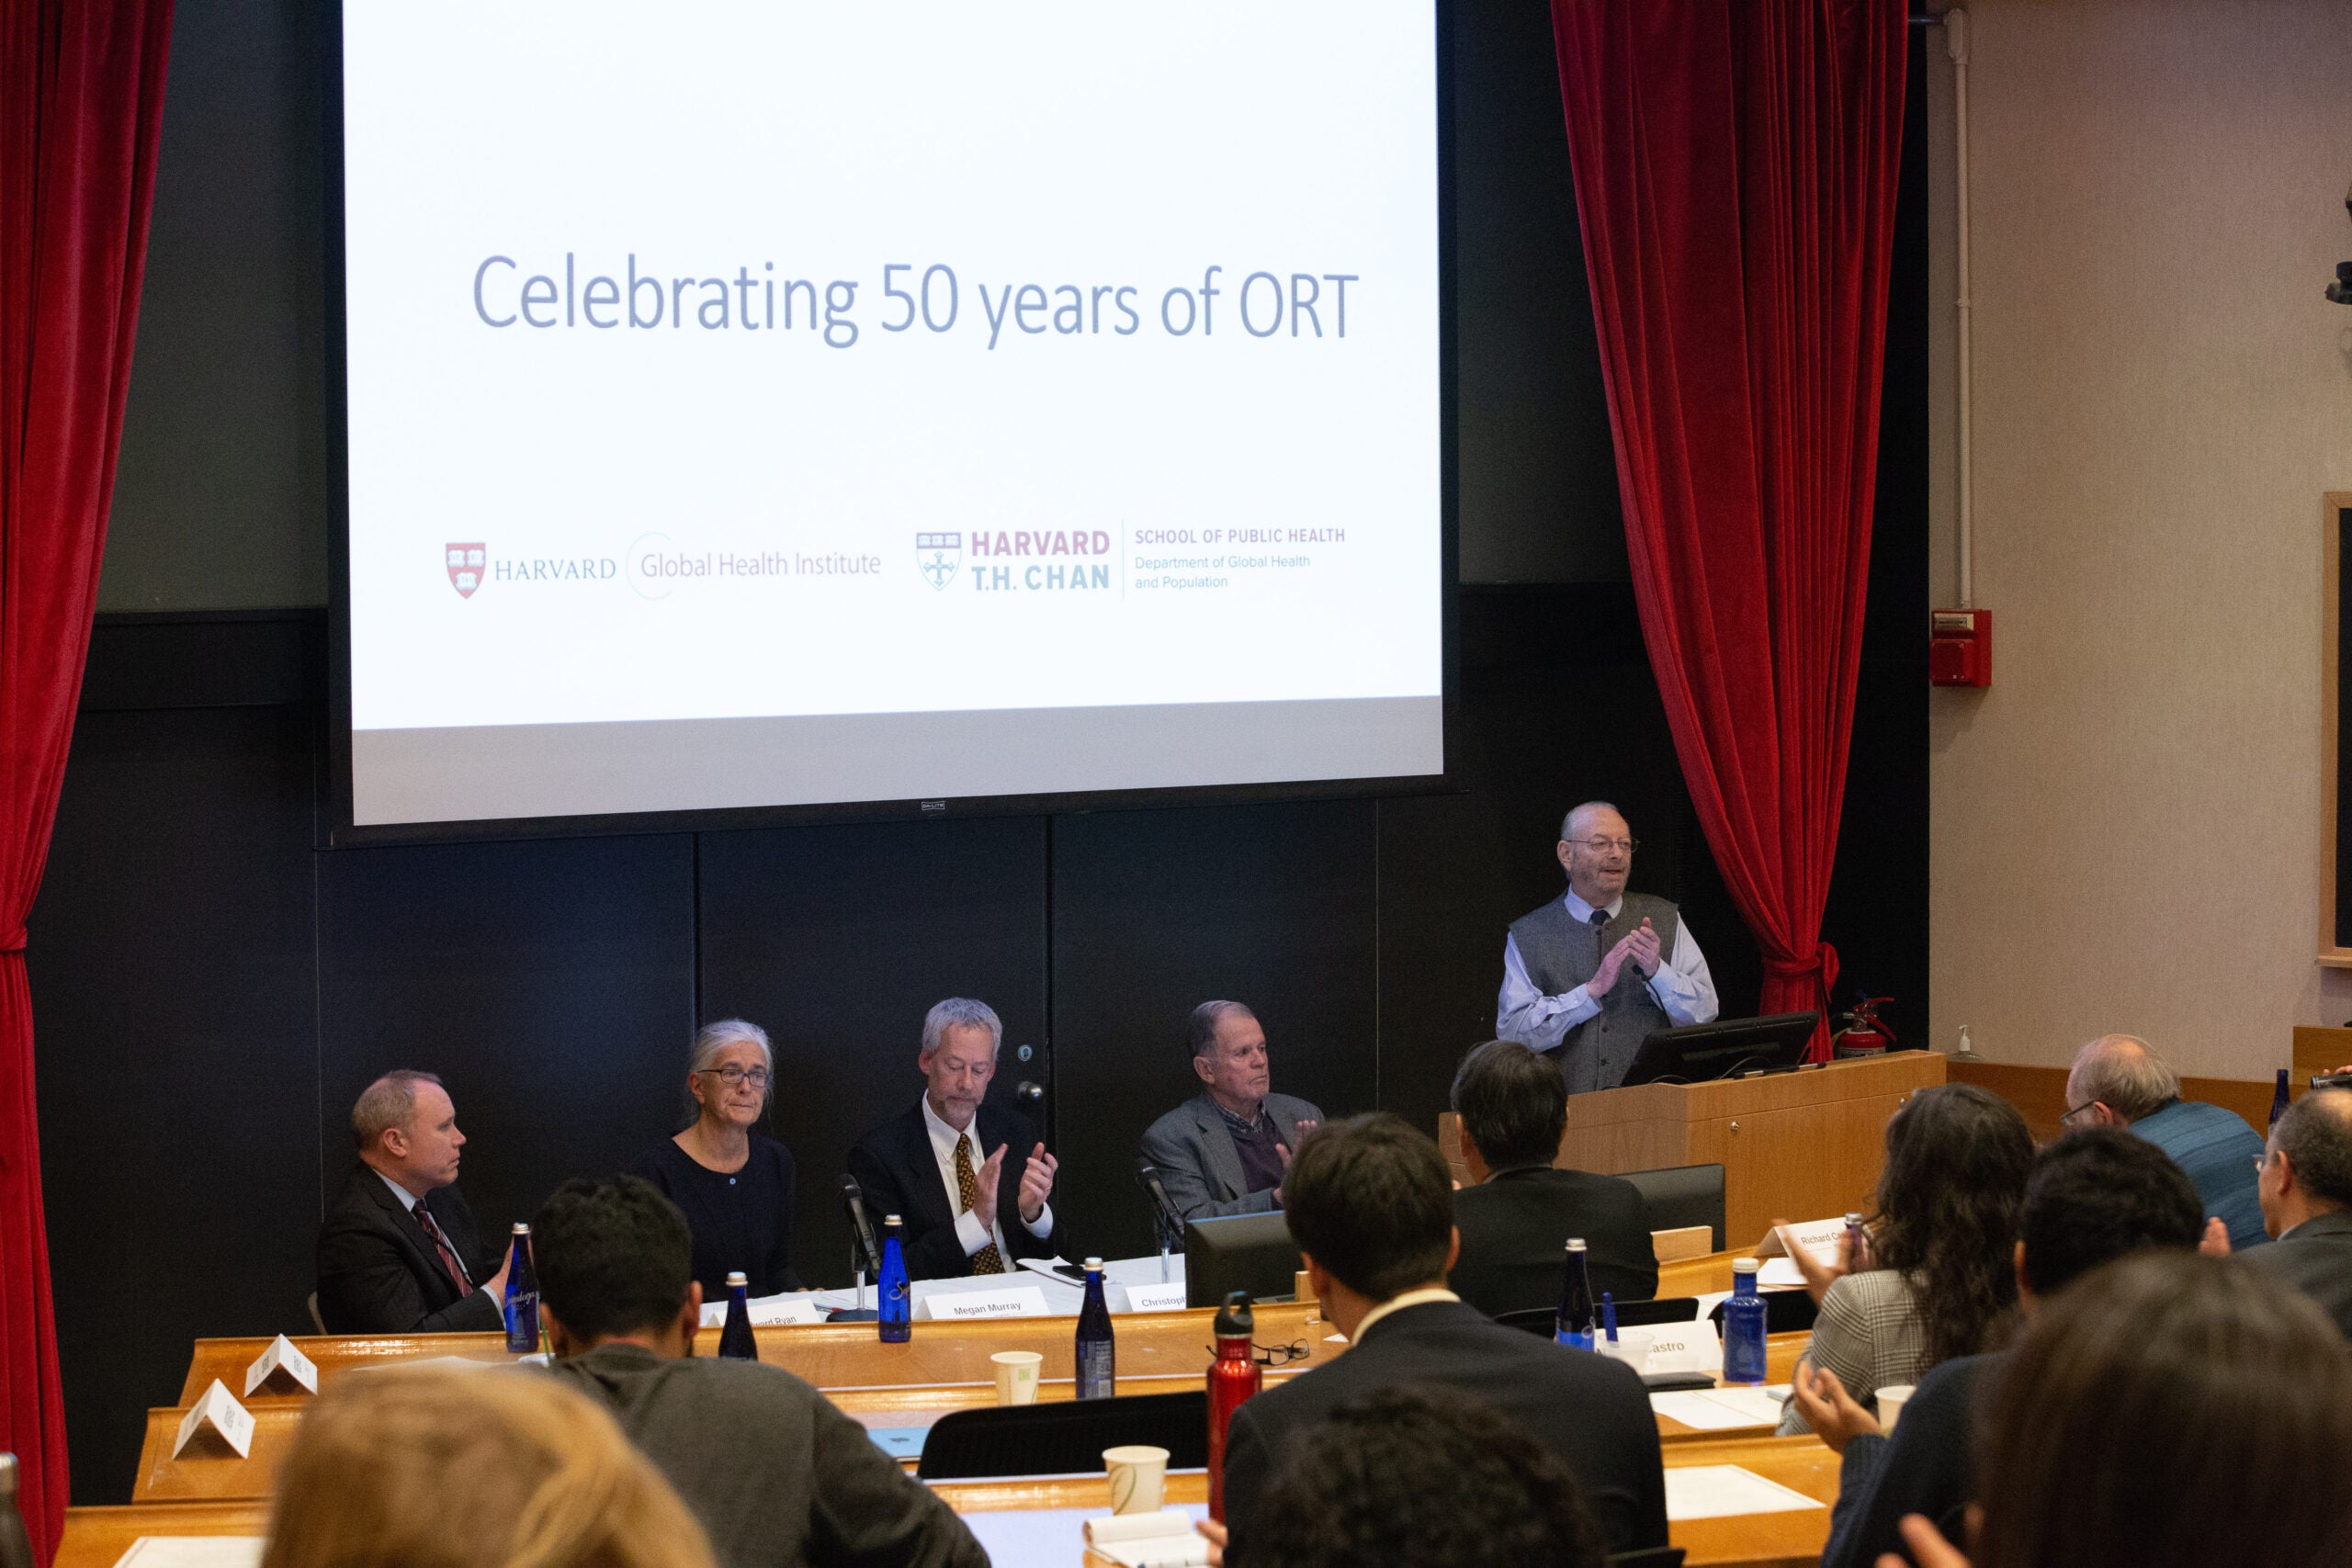 Faculty of Harvard Chan School celebrating the 50th anniversary of ORT